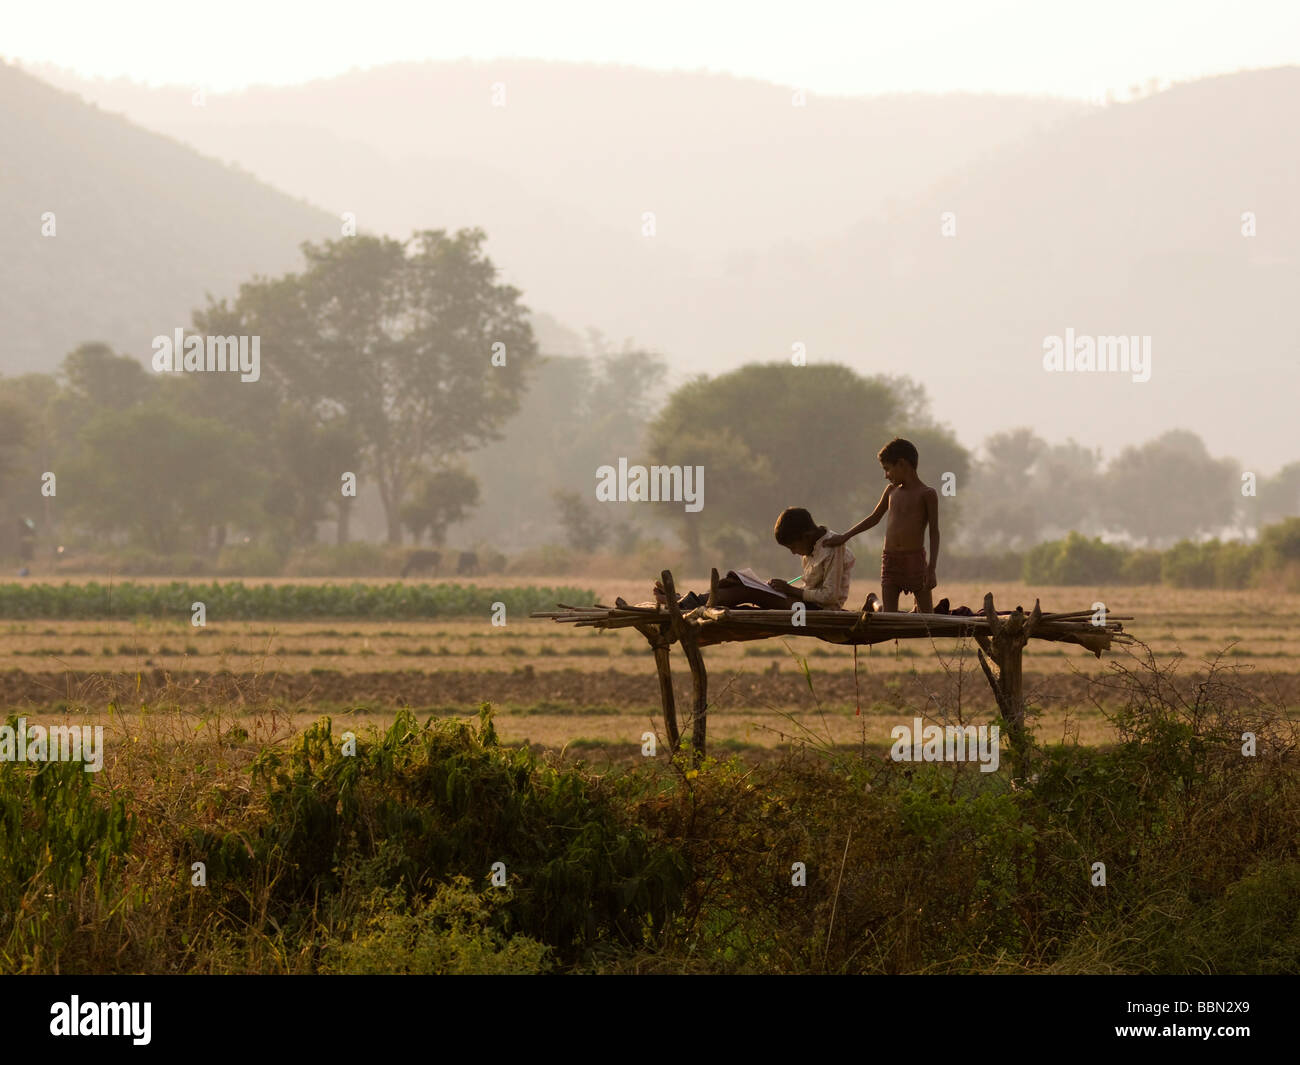 Rajasthan,India;Two boys on a raised wooden platform in Aravalli Hills Stock Photo